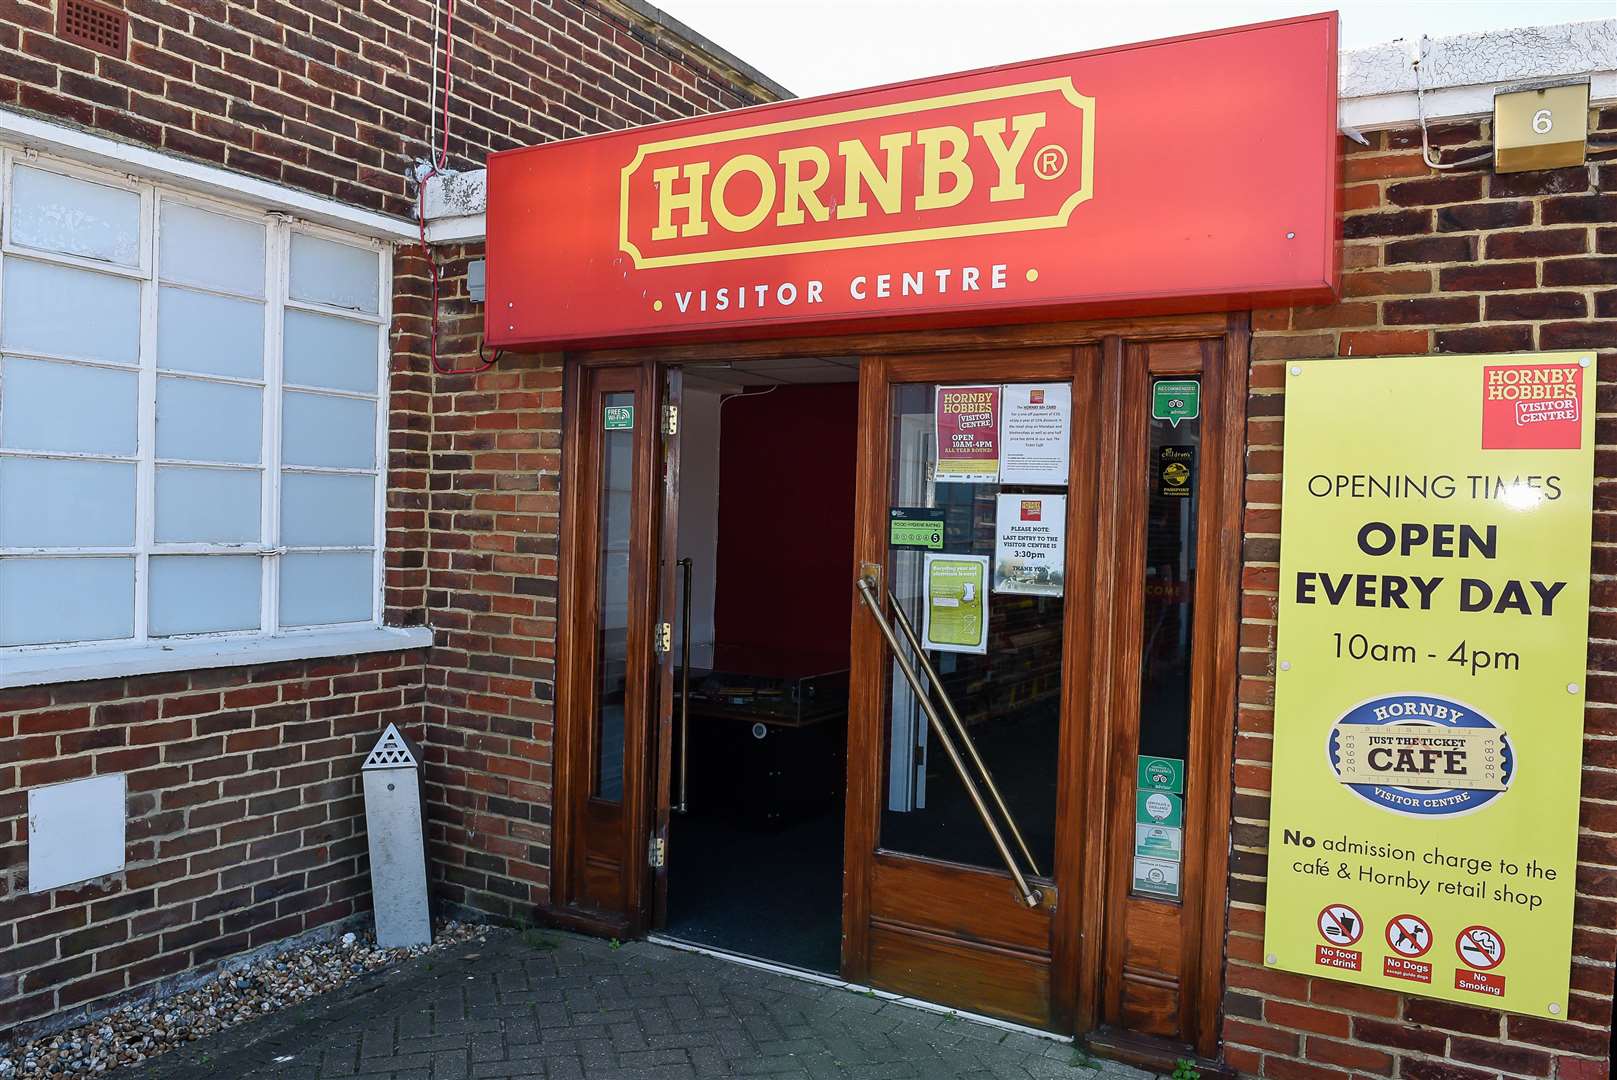 Hornby is based in Margate